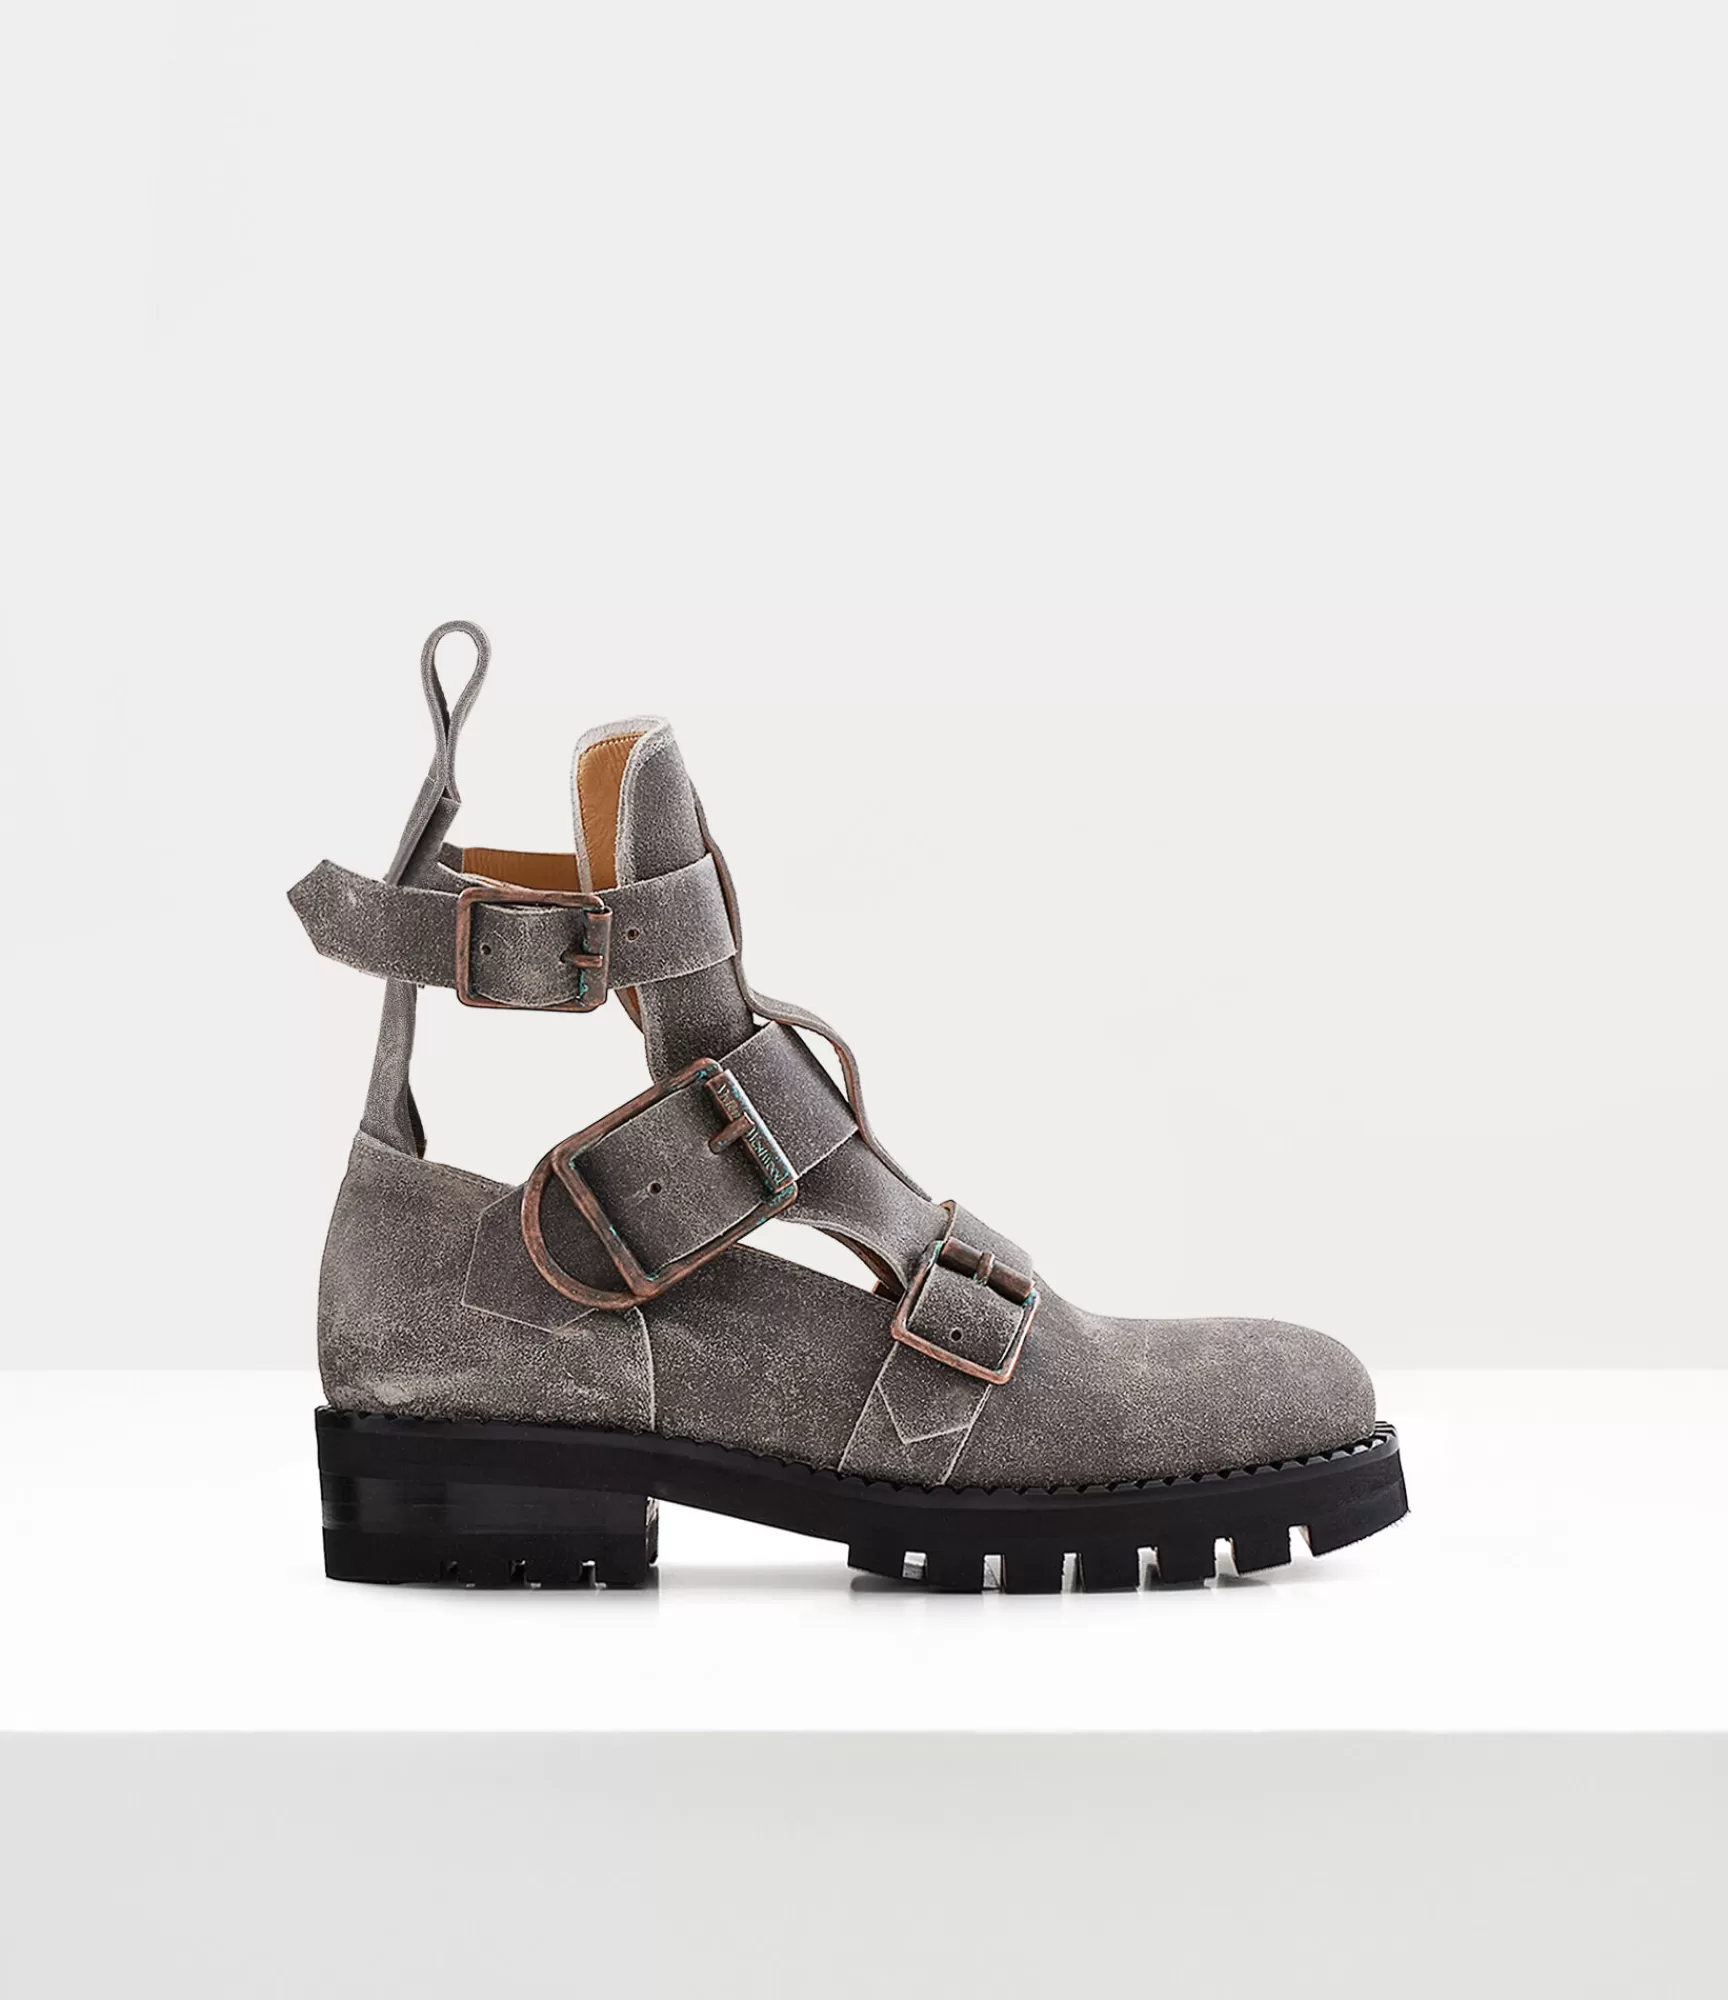 Vivienne Westwood Boots*Rome boot Grey